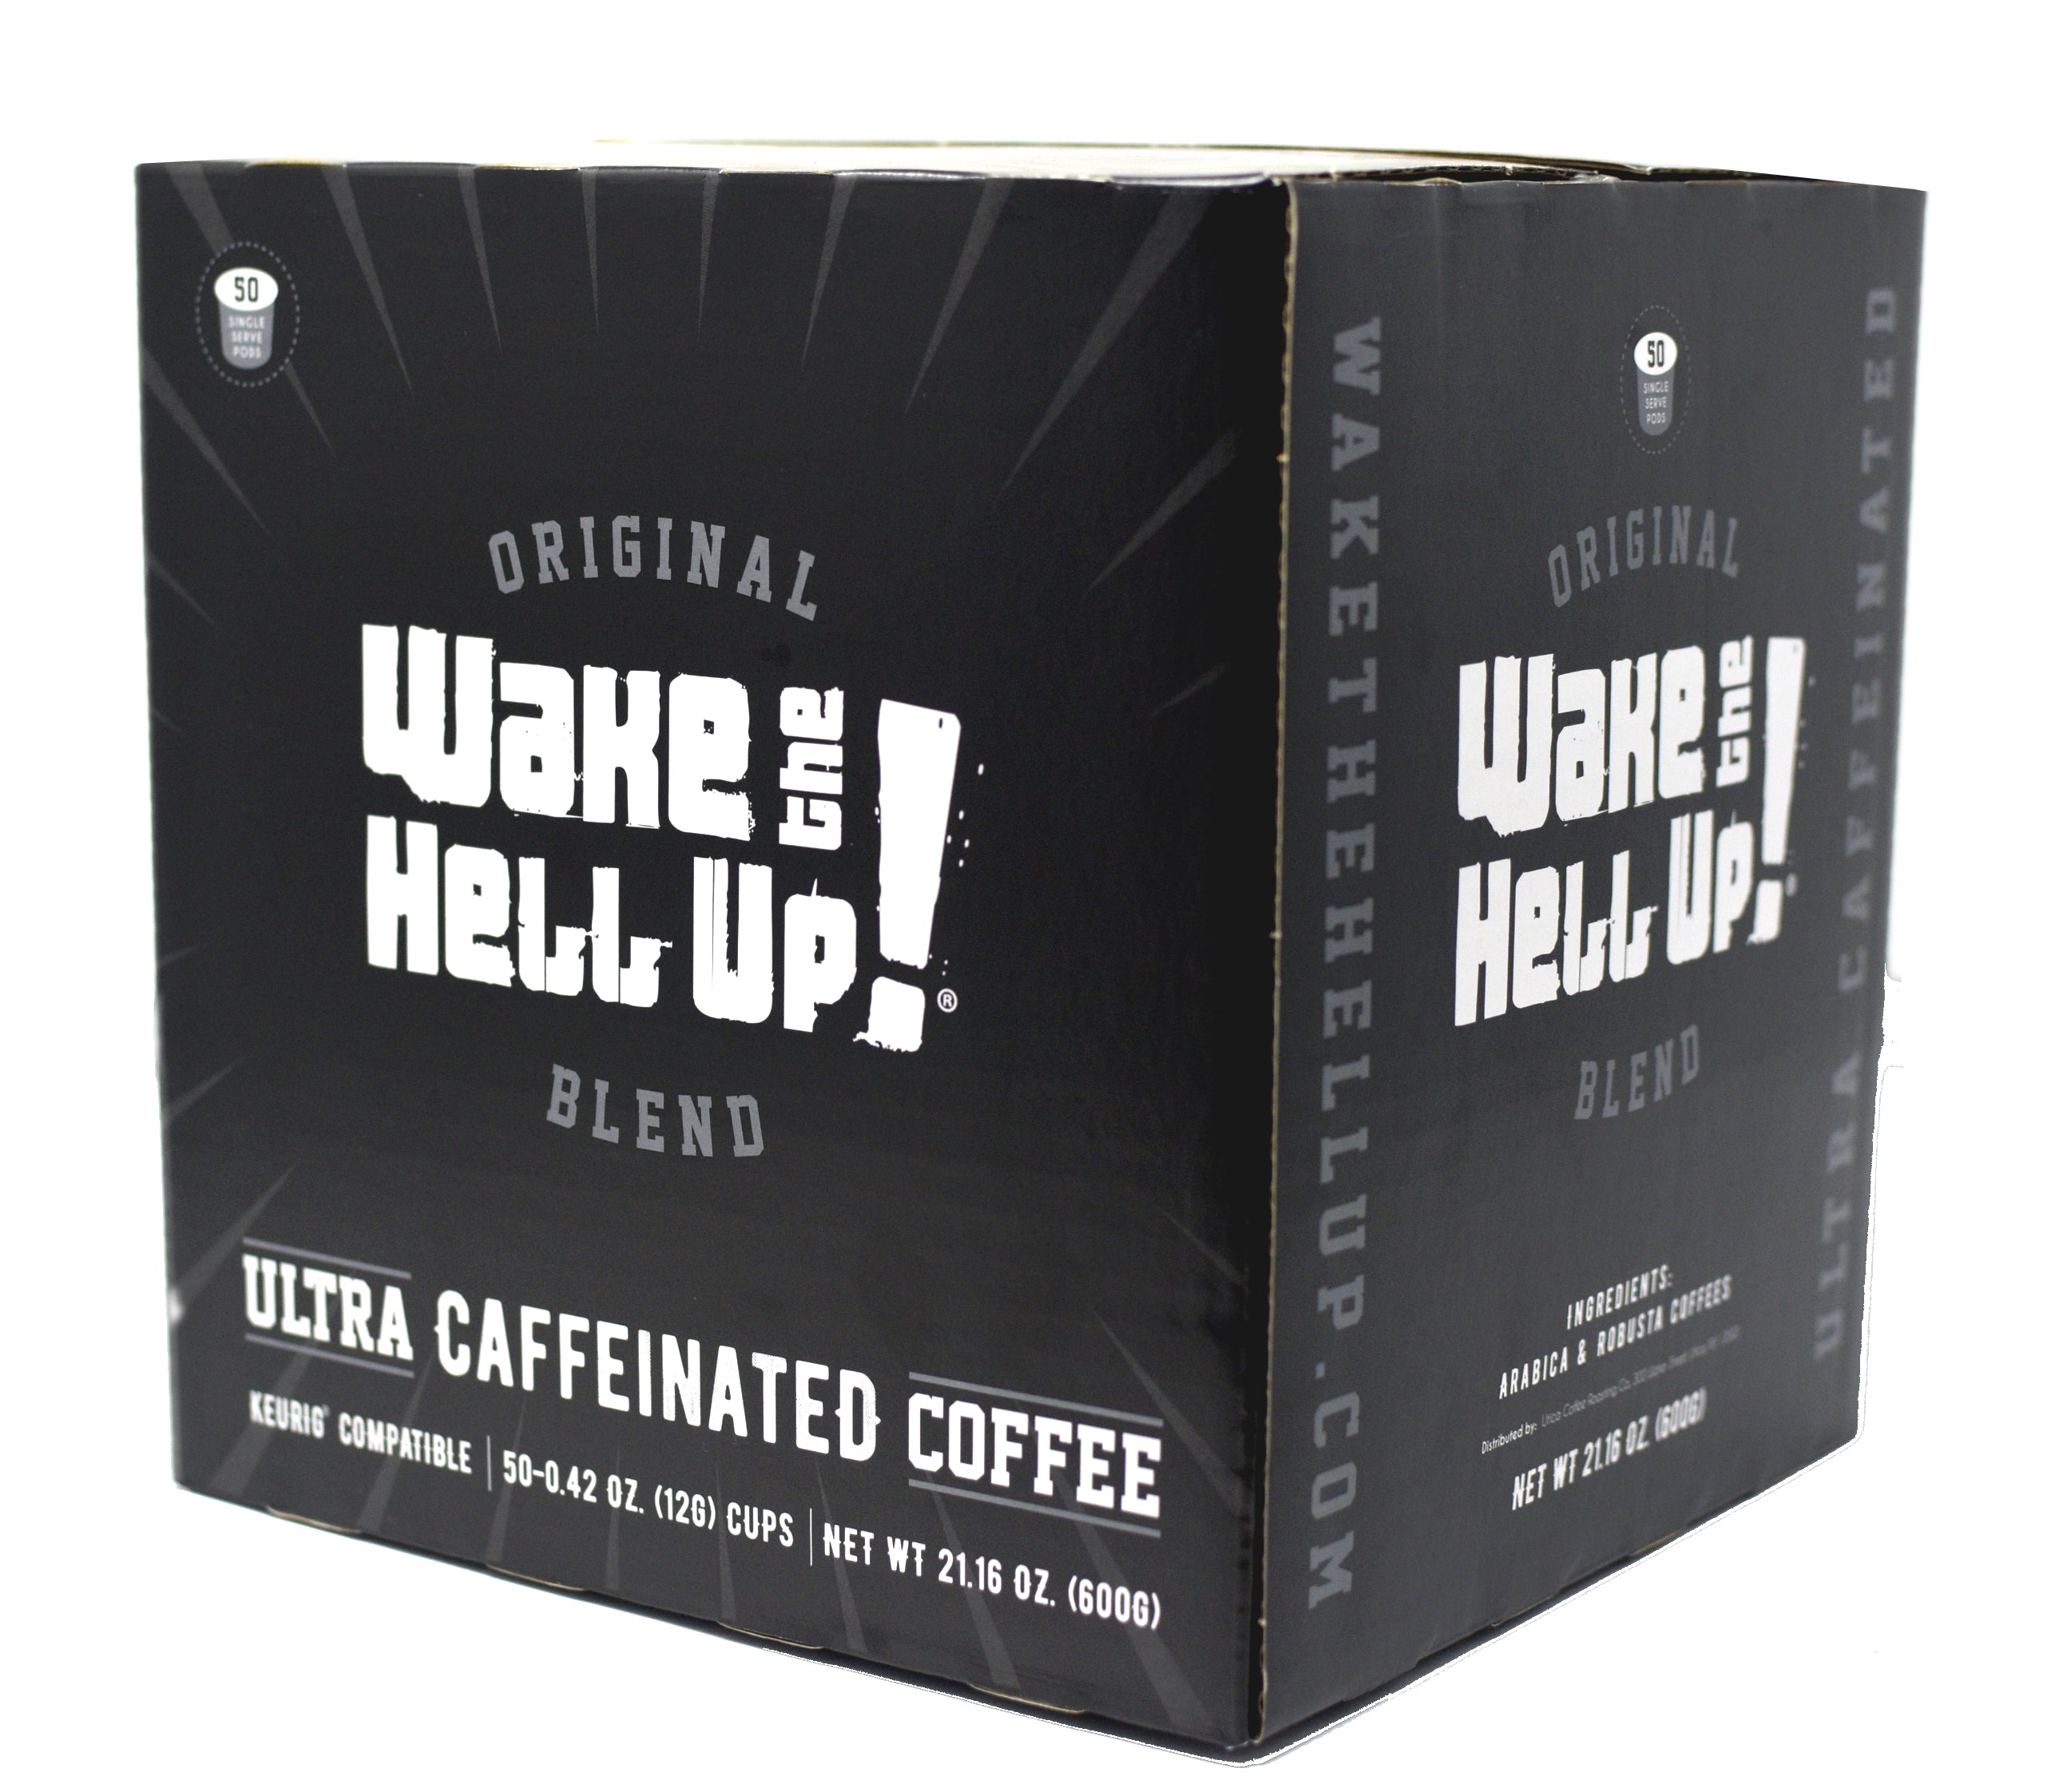 Wake The Crew coffee start-up sees growth for coffee concentrates